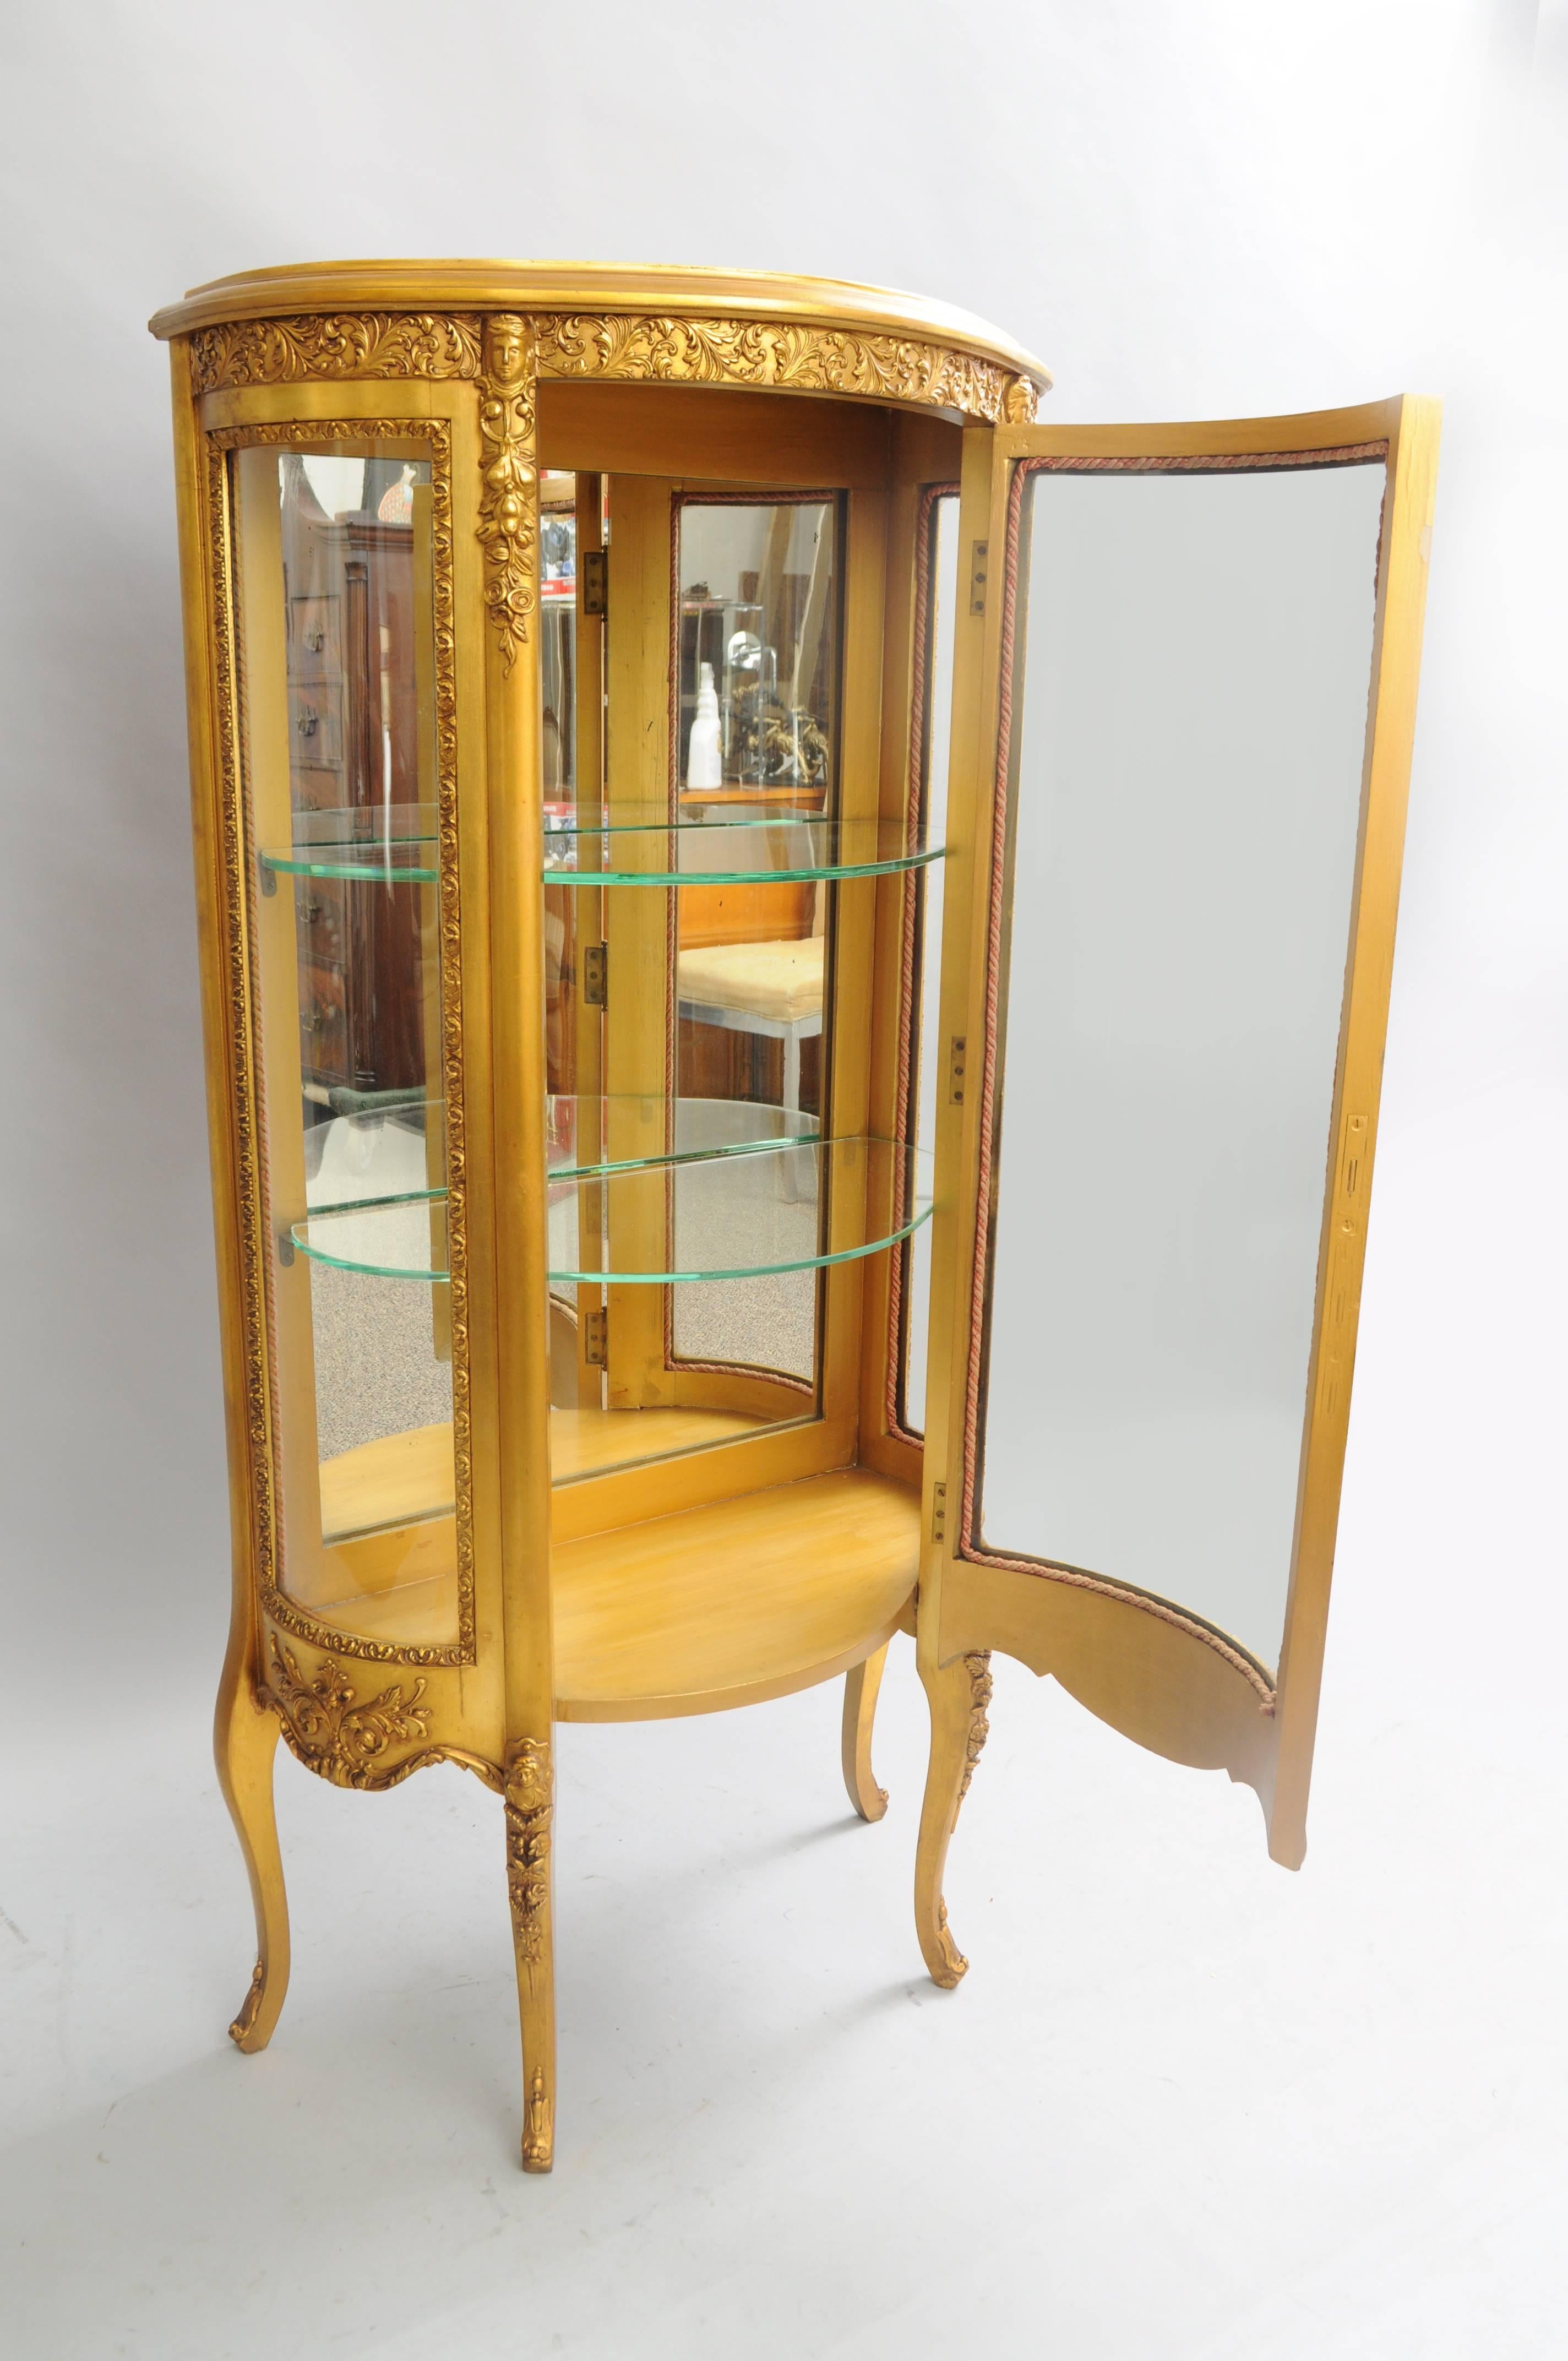 Small antique French Louis XV style gold giltwood curved glass figural display case. Item features a petite form with gold gilt acanthus detailing as well as faces on the upper and faces on the legs. Curio further features a single door with lock